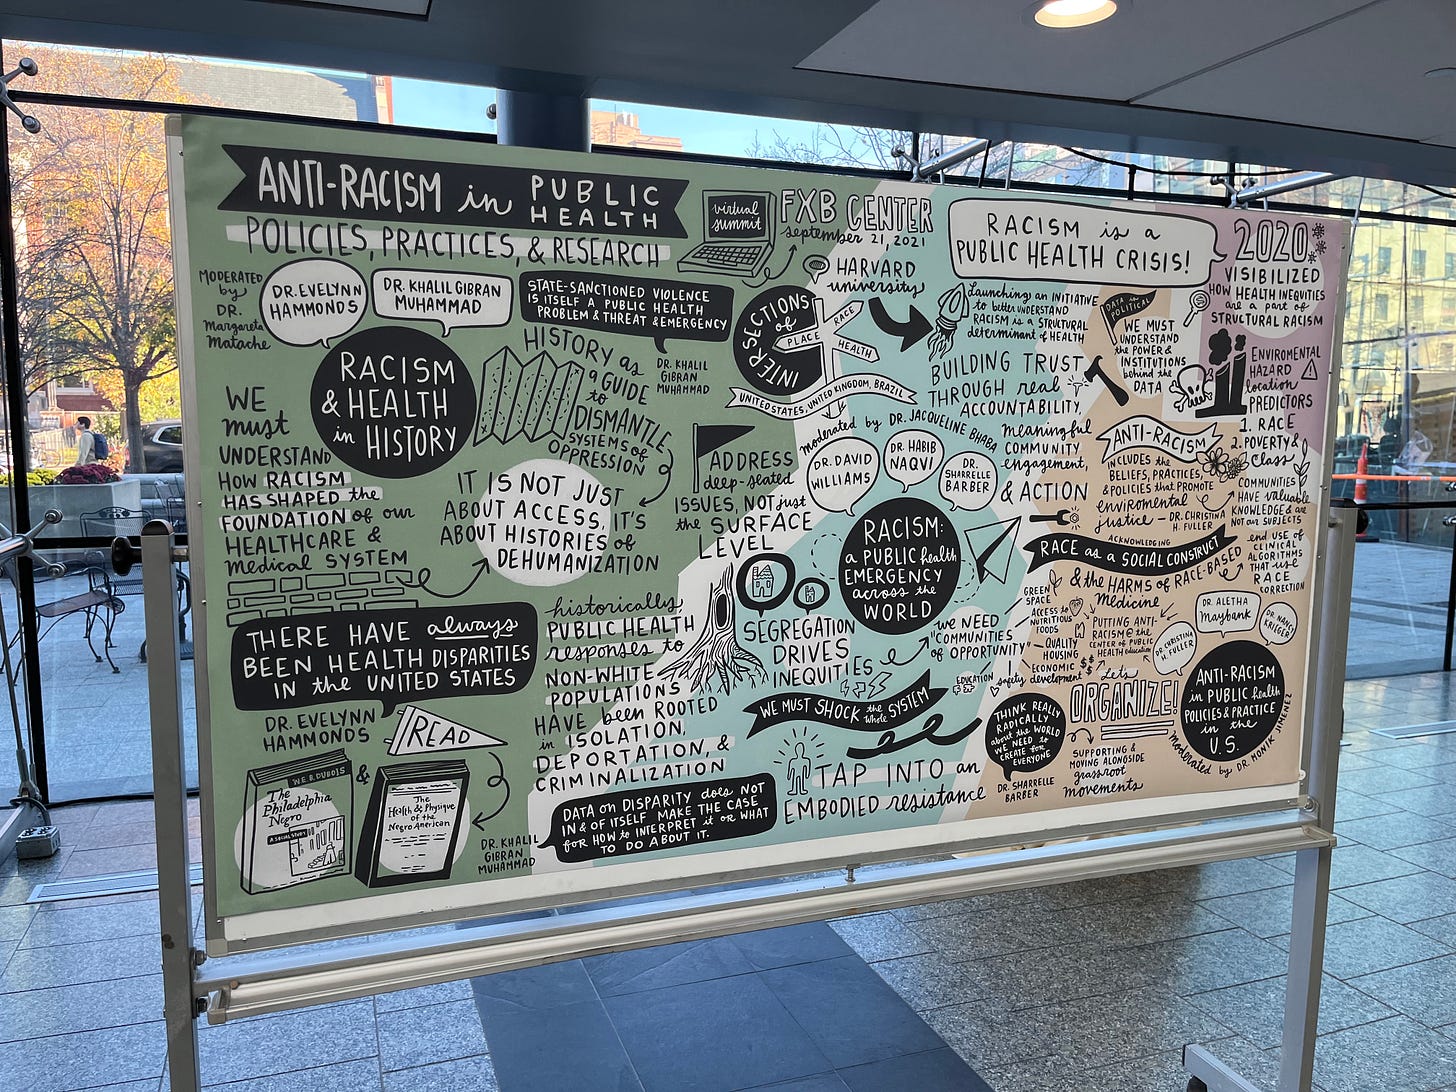 Photograph of a blown up graphic recording on Anti-Racism in Public Health